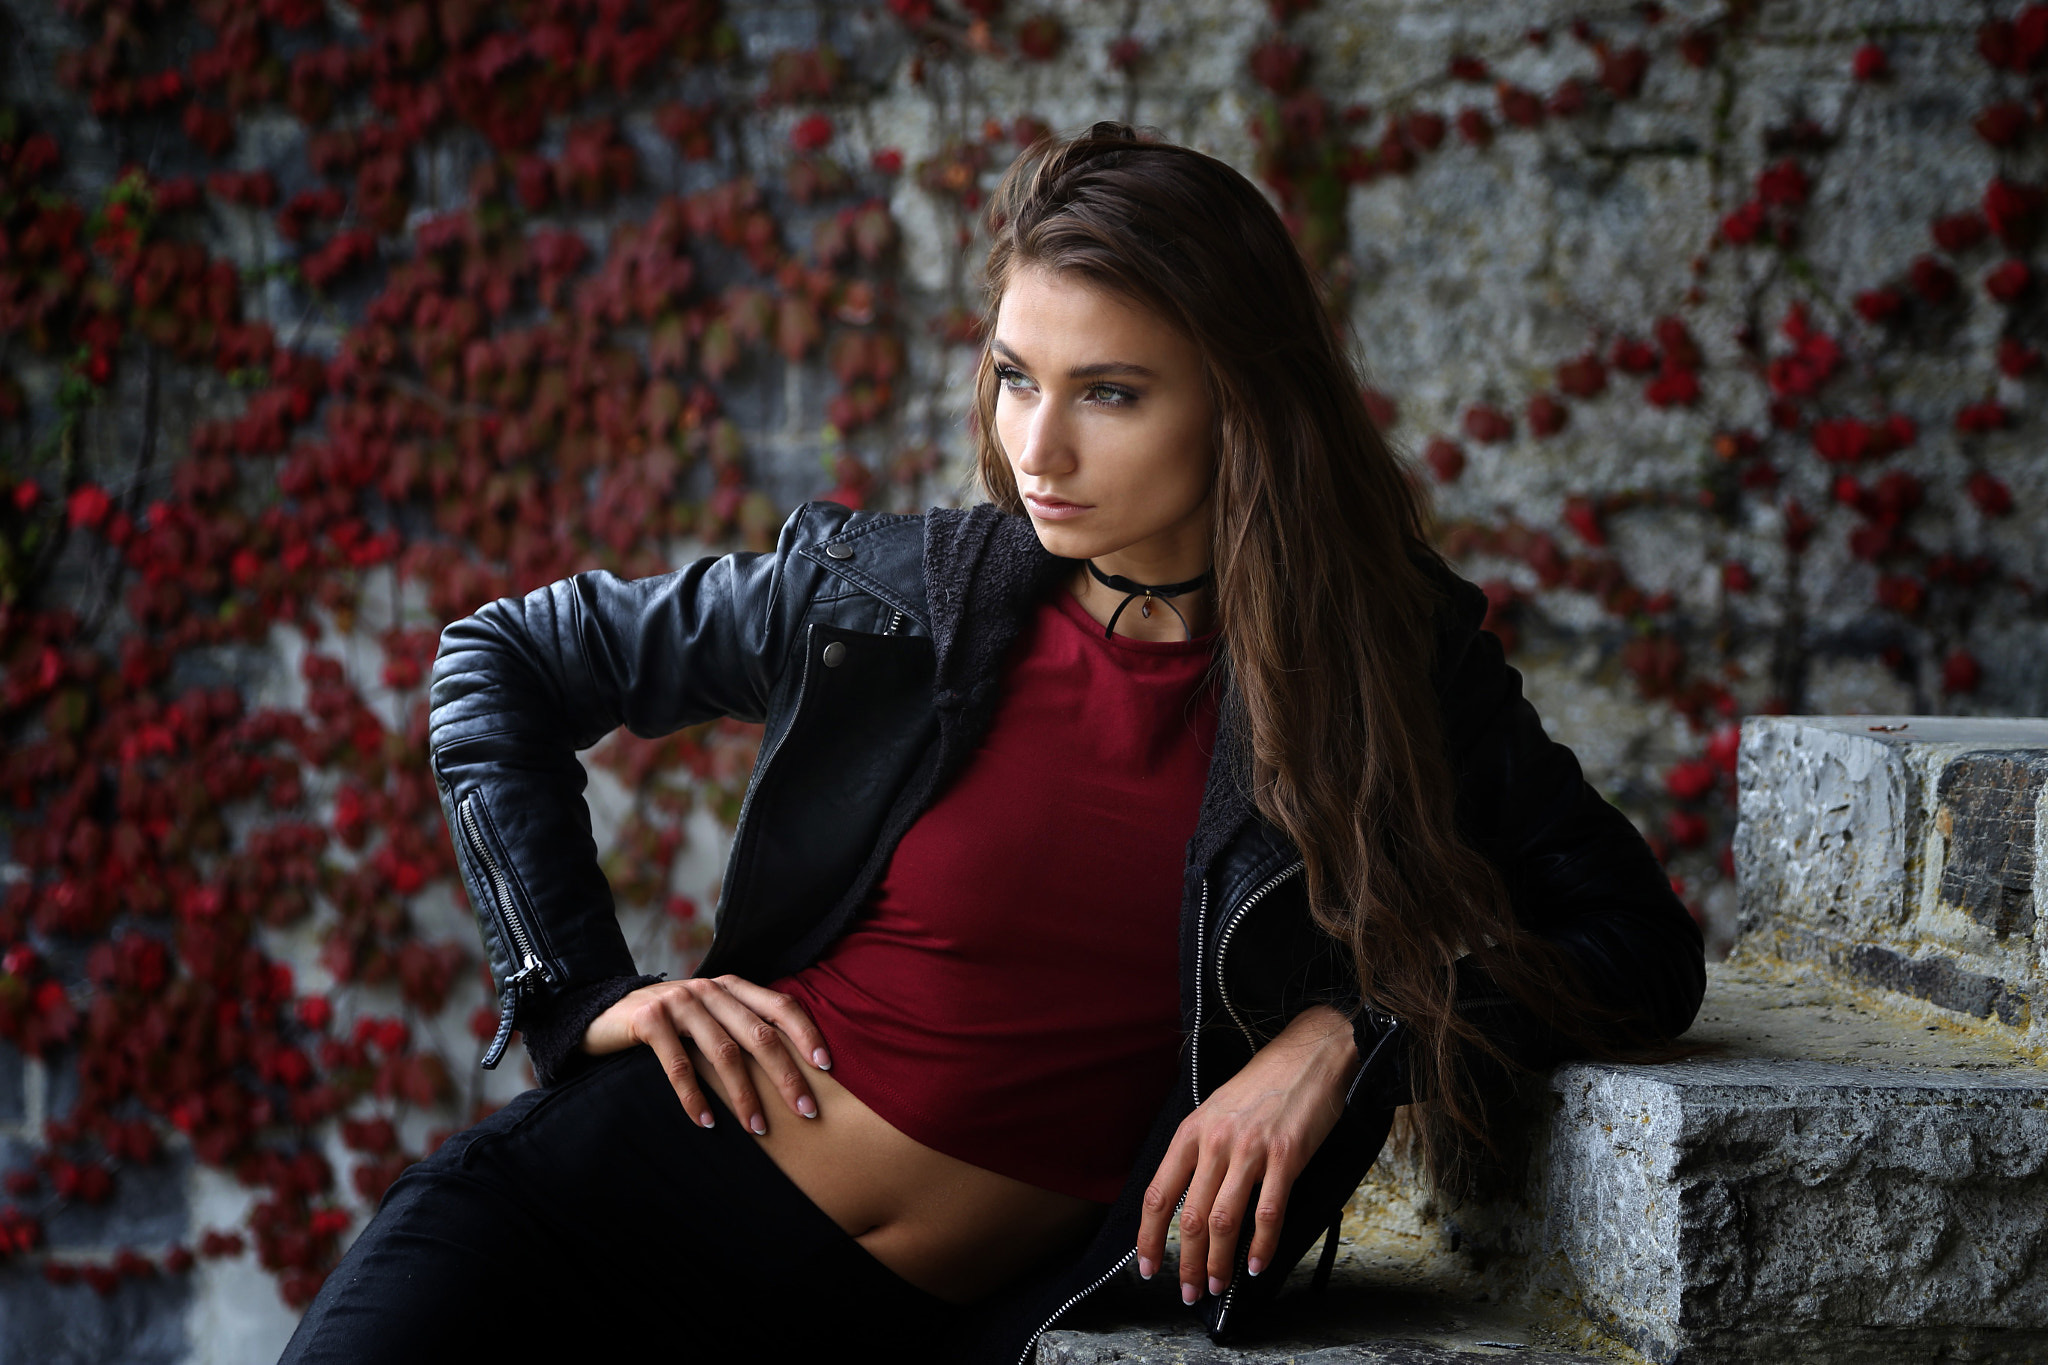 leather jackets wallpapers,red,beauty,fashion,model,photography ...